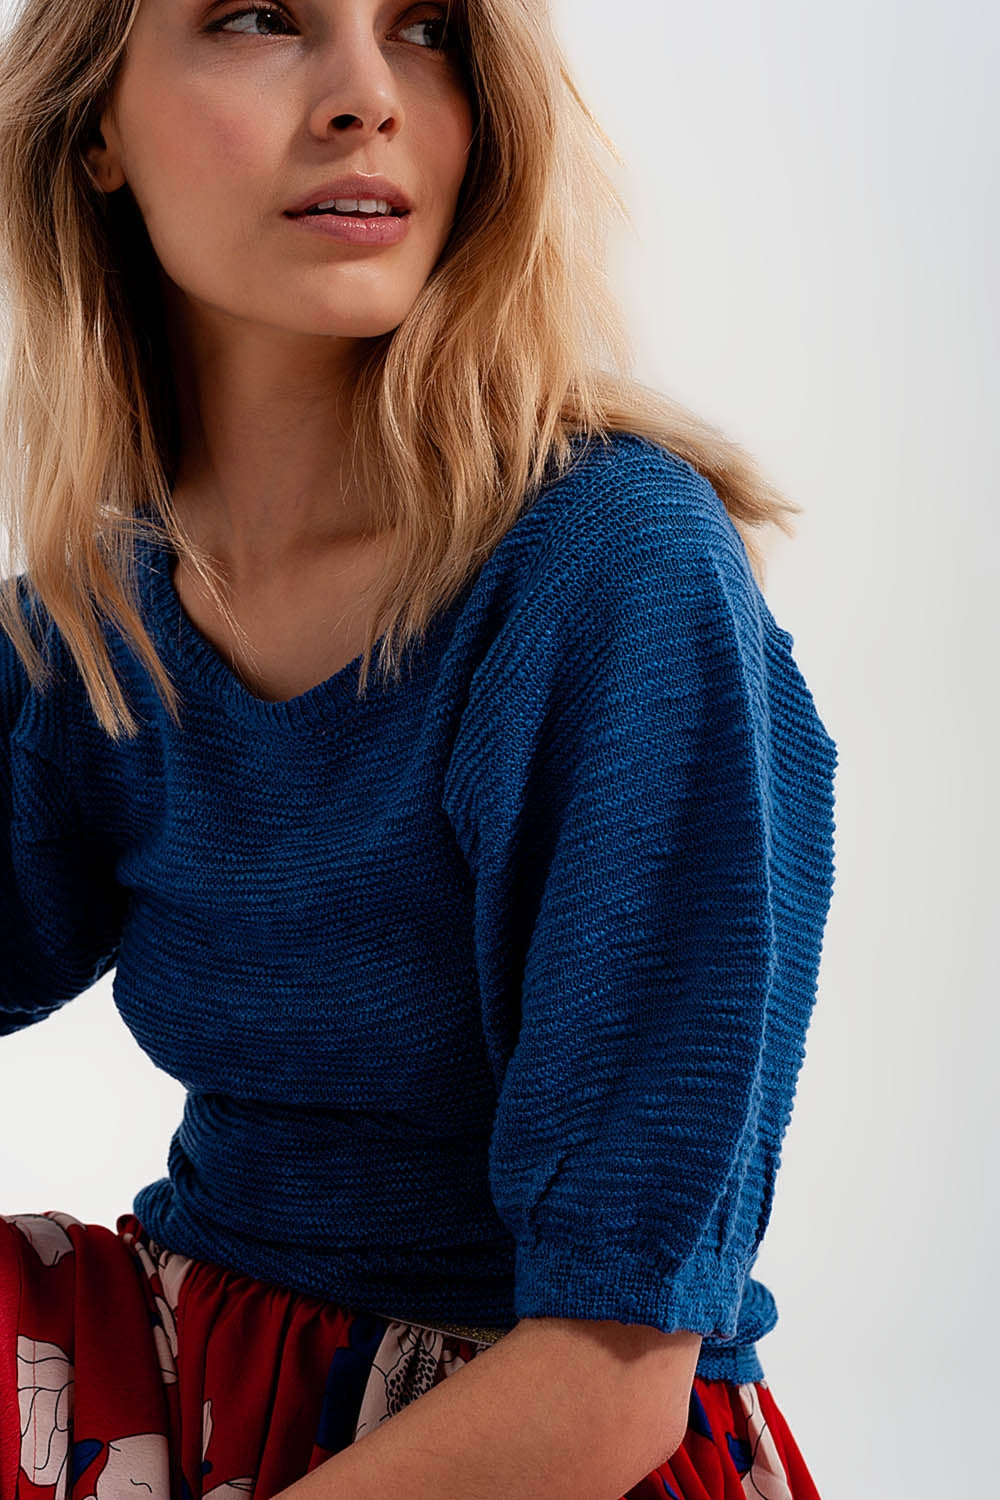 Short Sleeve Knitted Top in Blue